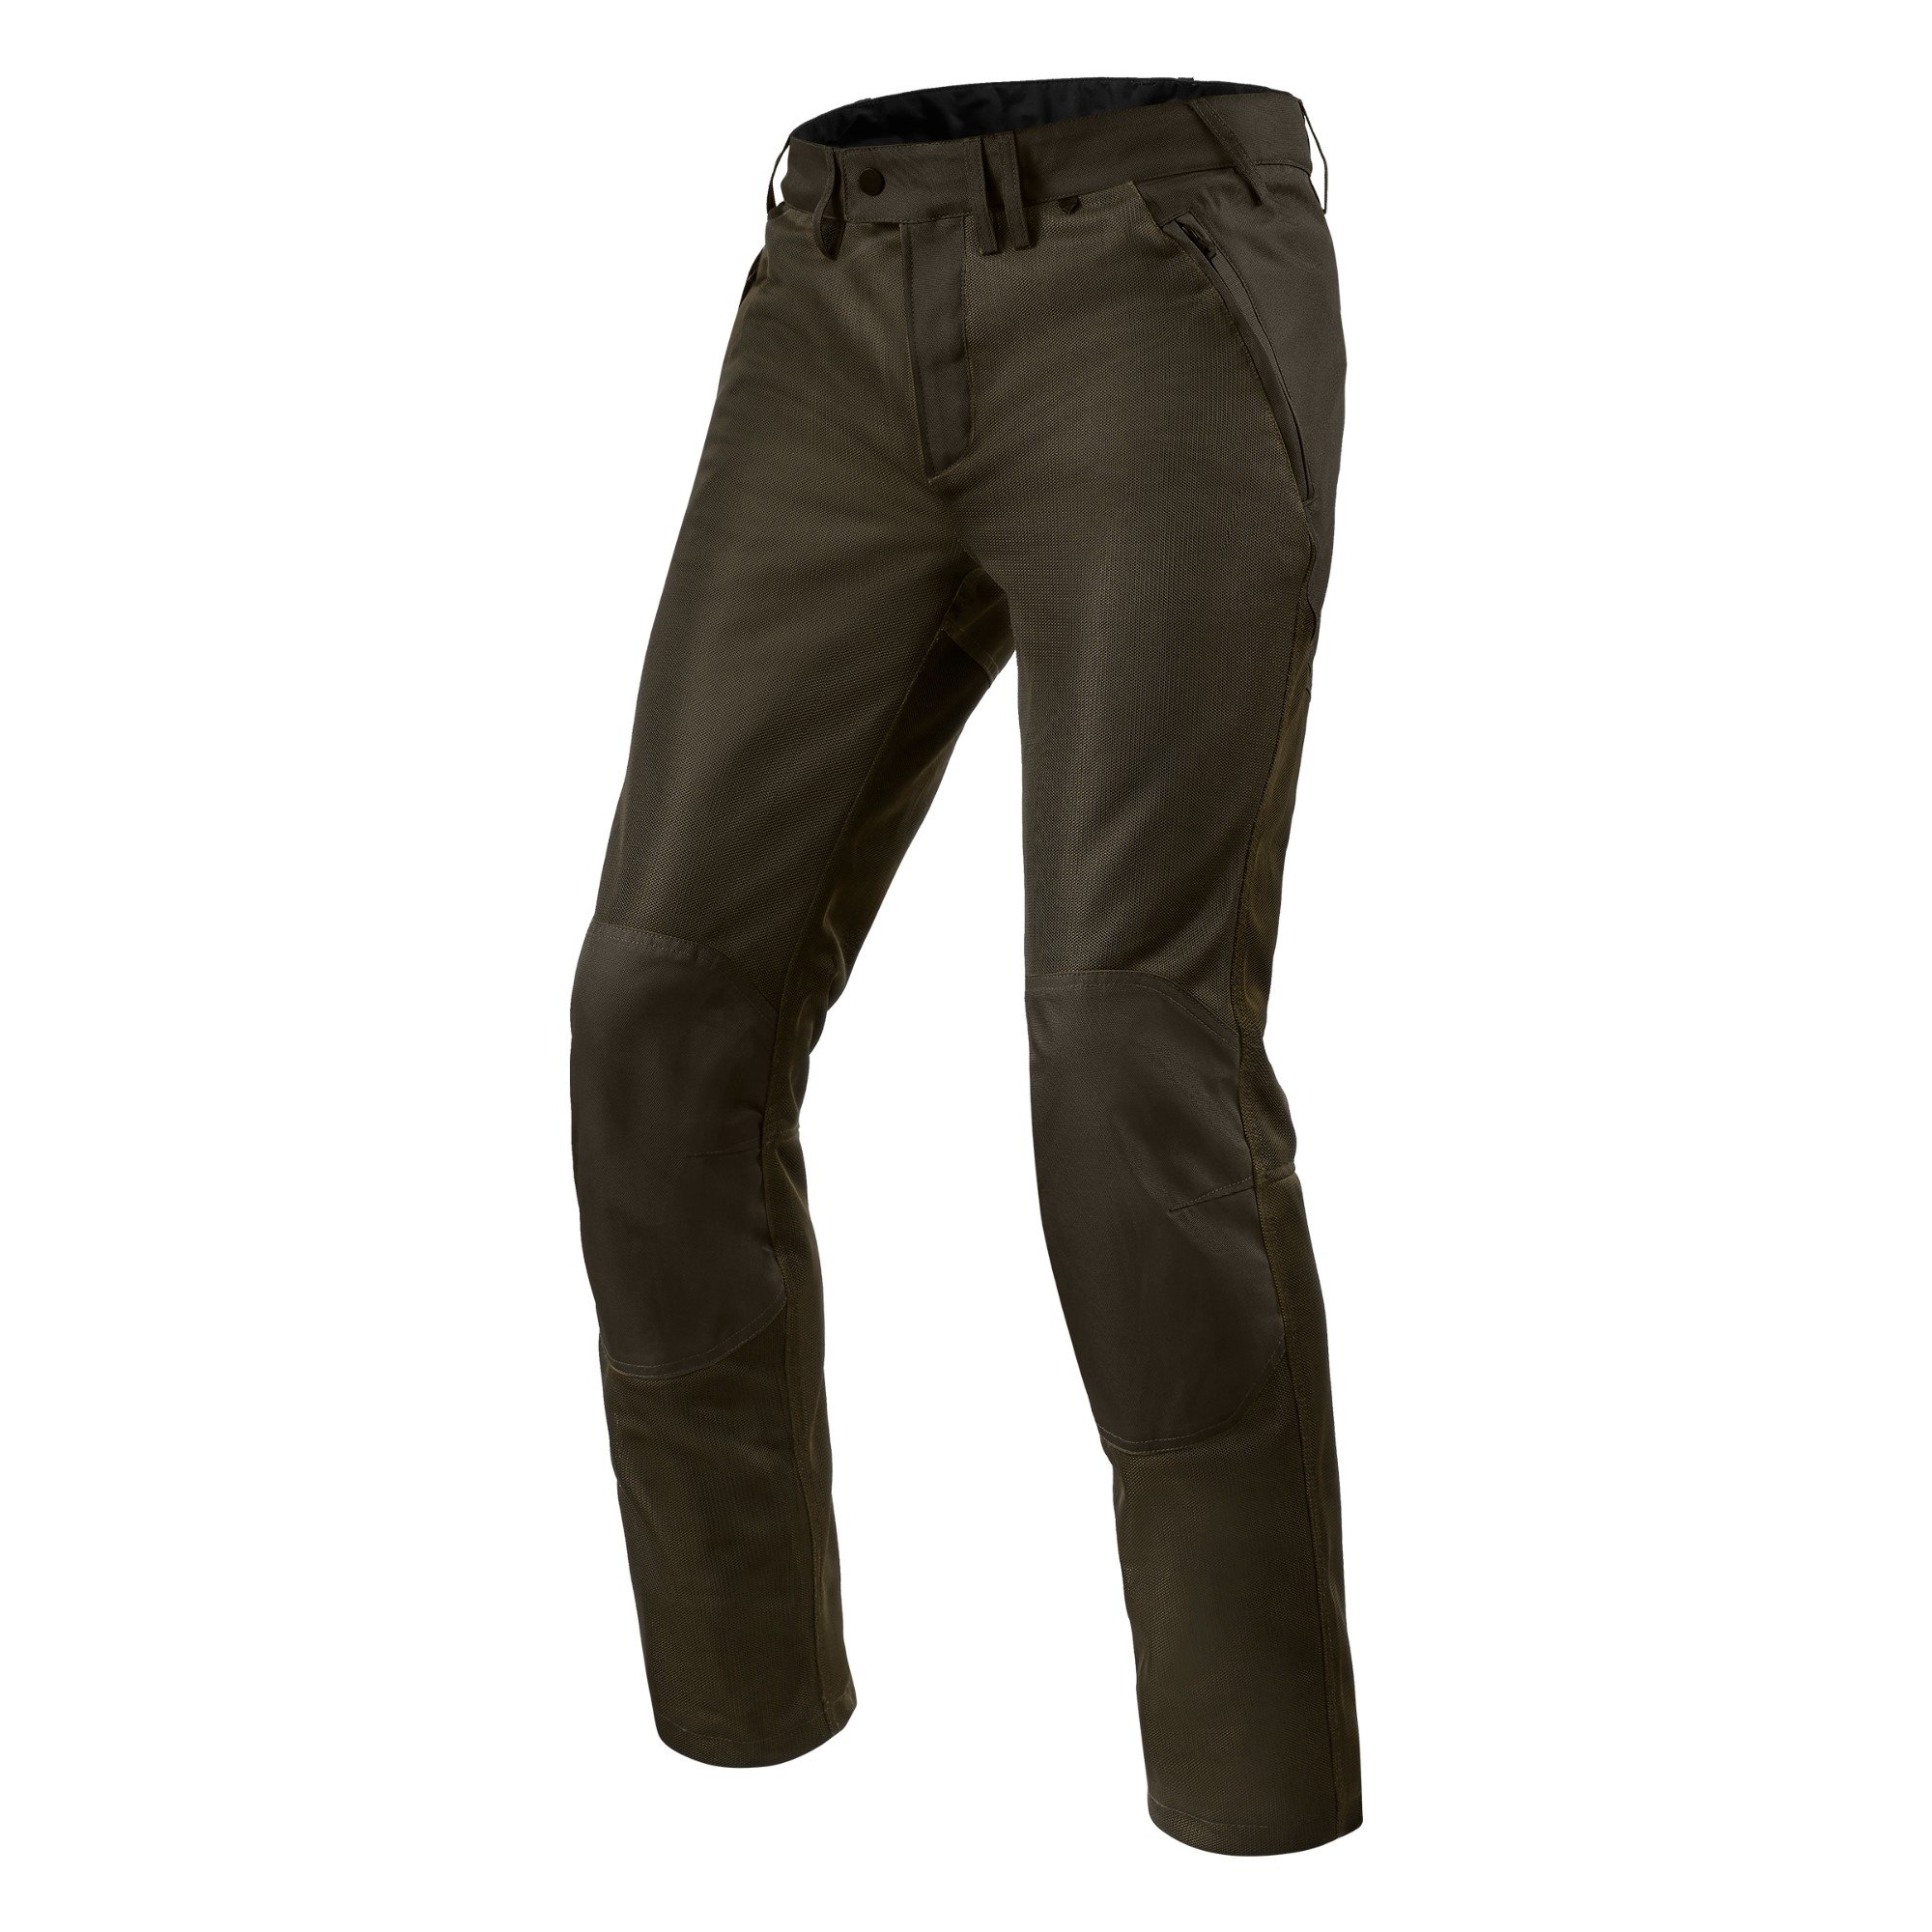 Image of REV'IT! Pants Eclipse 2 Black Olive Long Motorcycle Pants Size 2XL ID 8700001368896